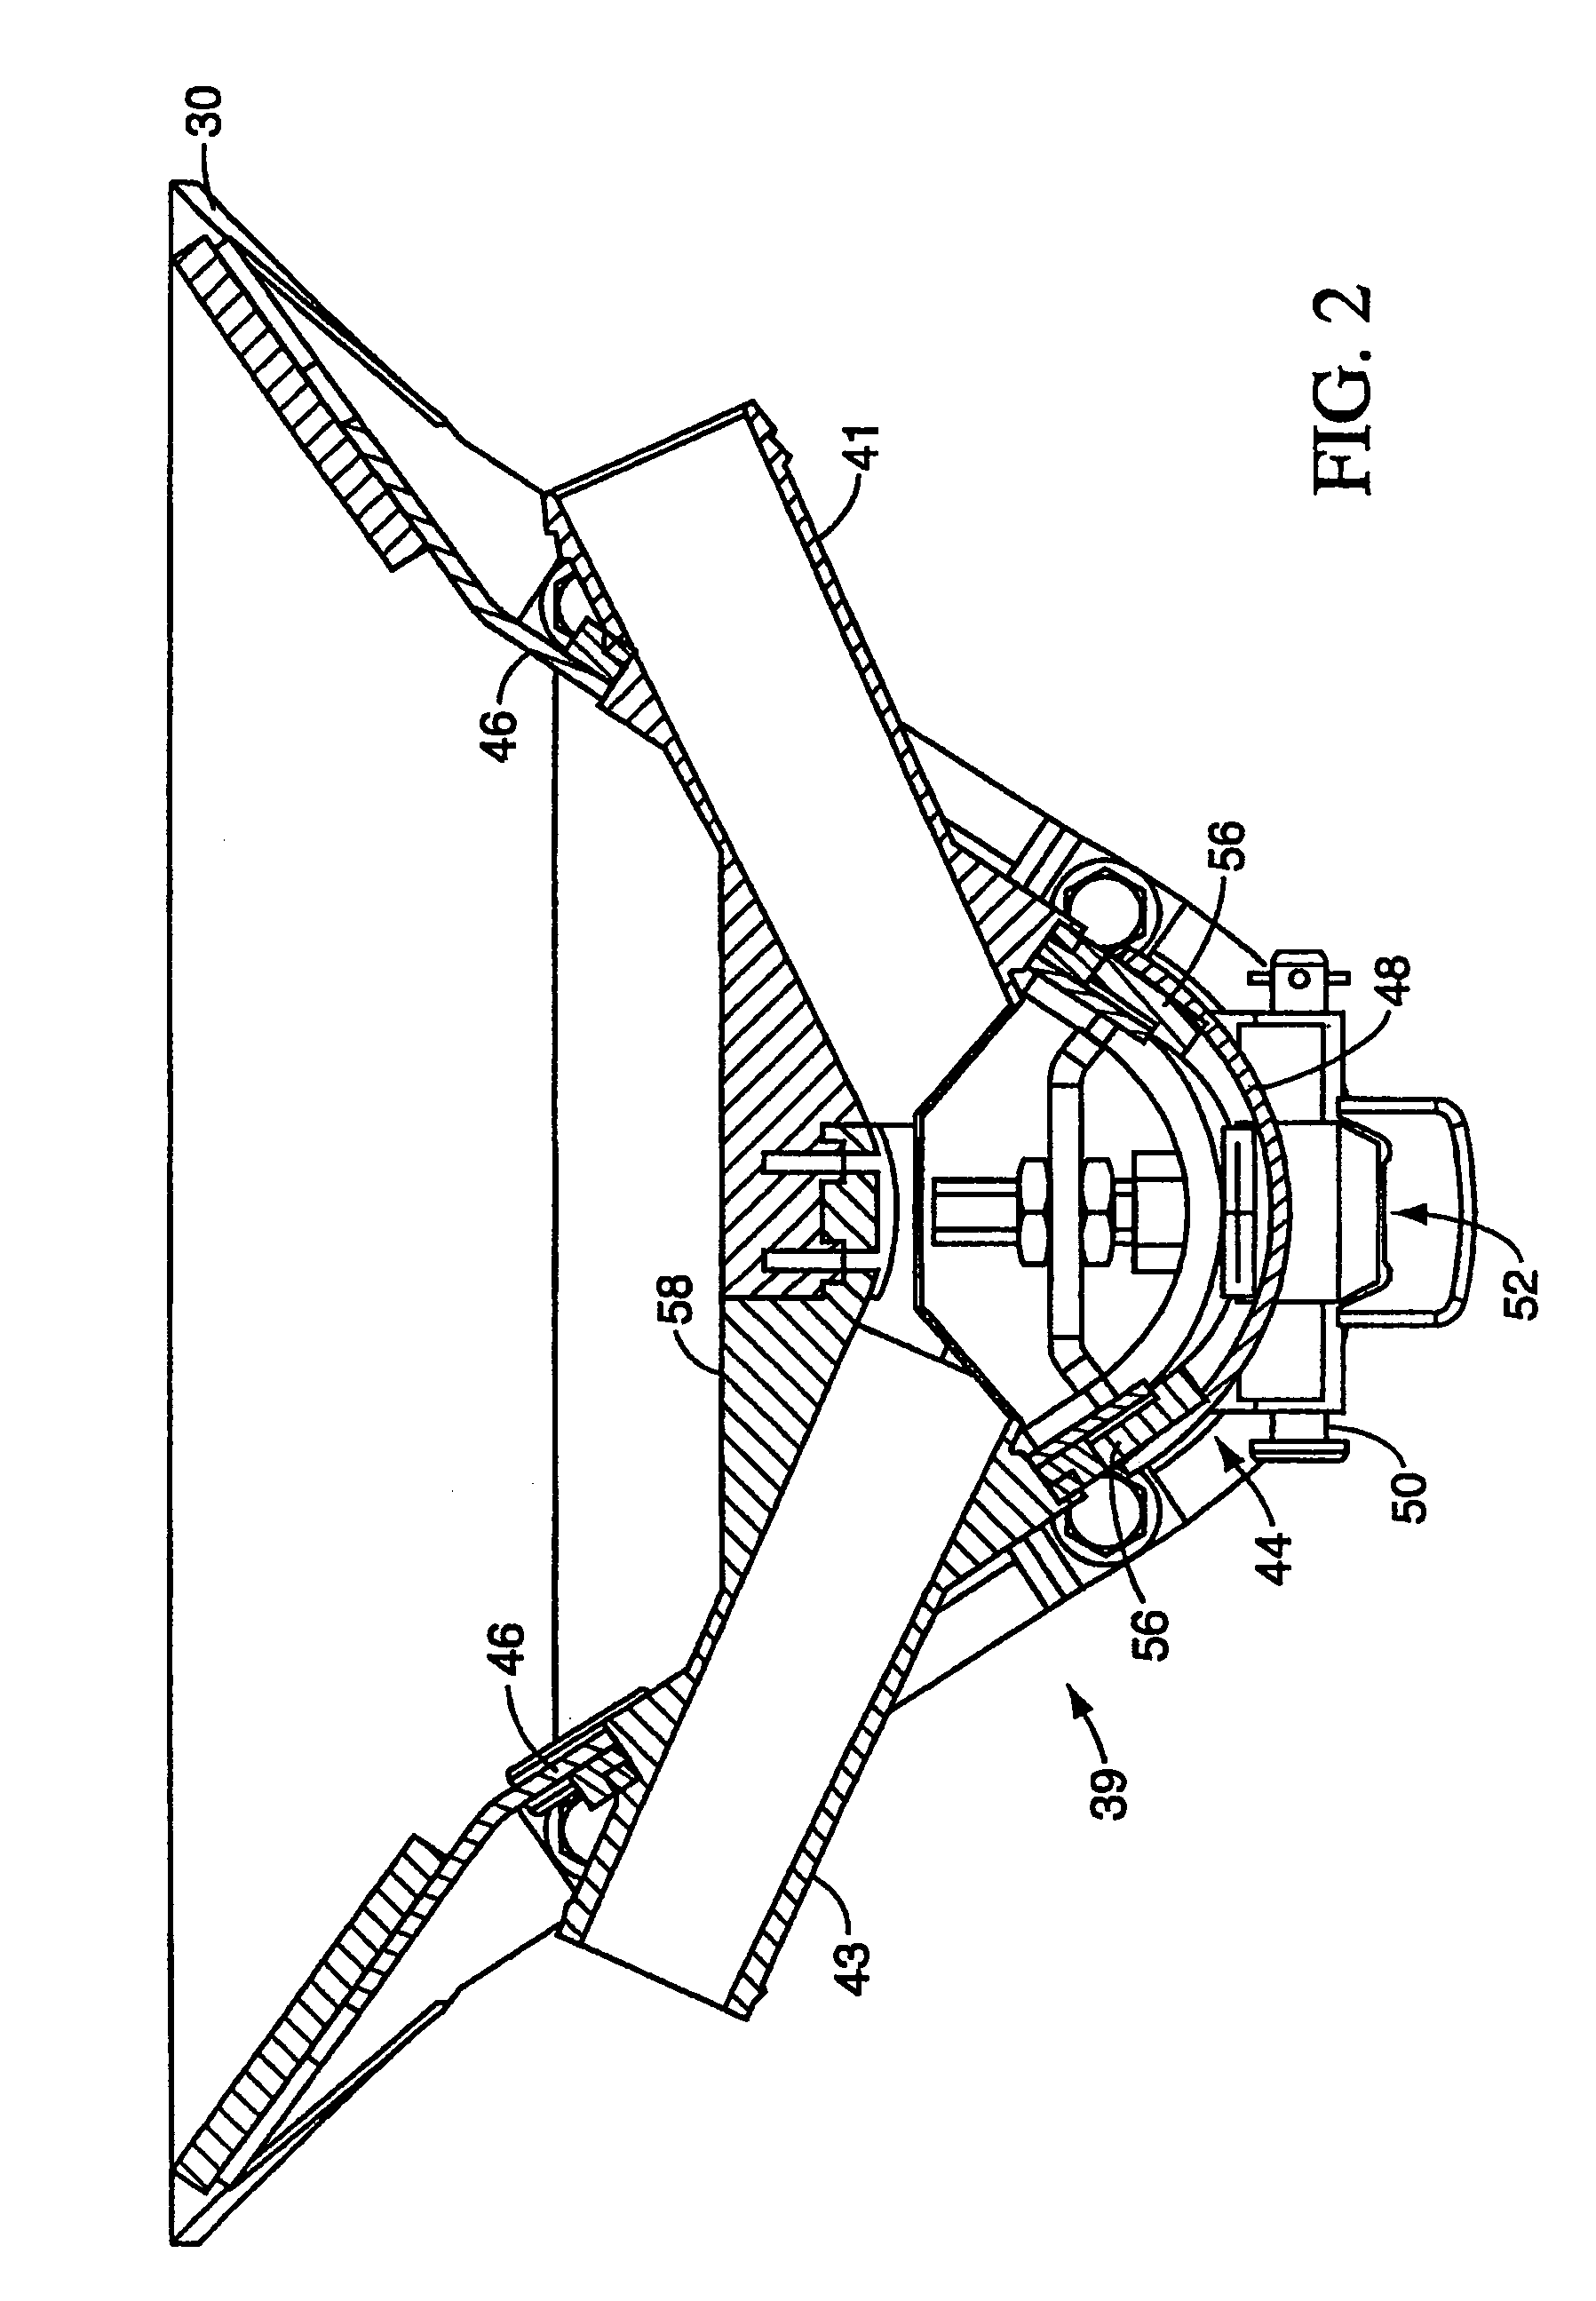 Agitation system for an agricultural machine product distribution system